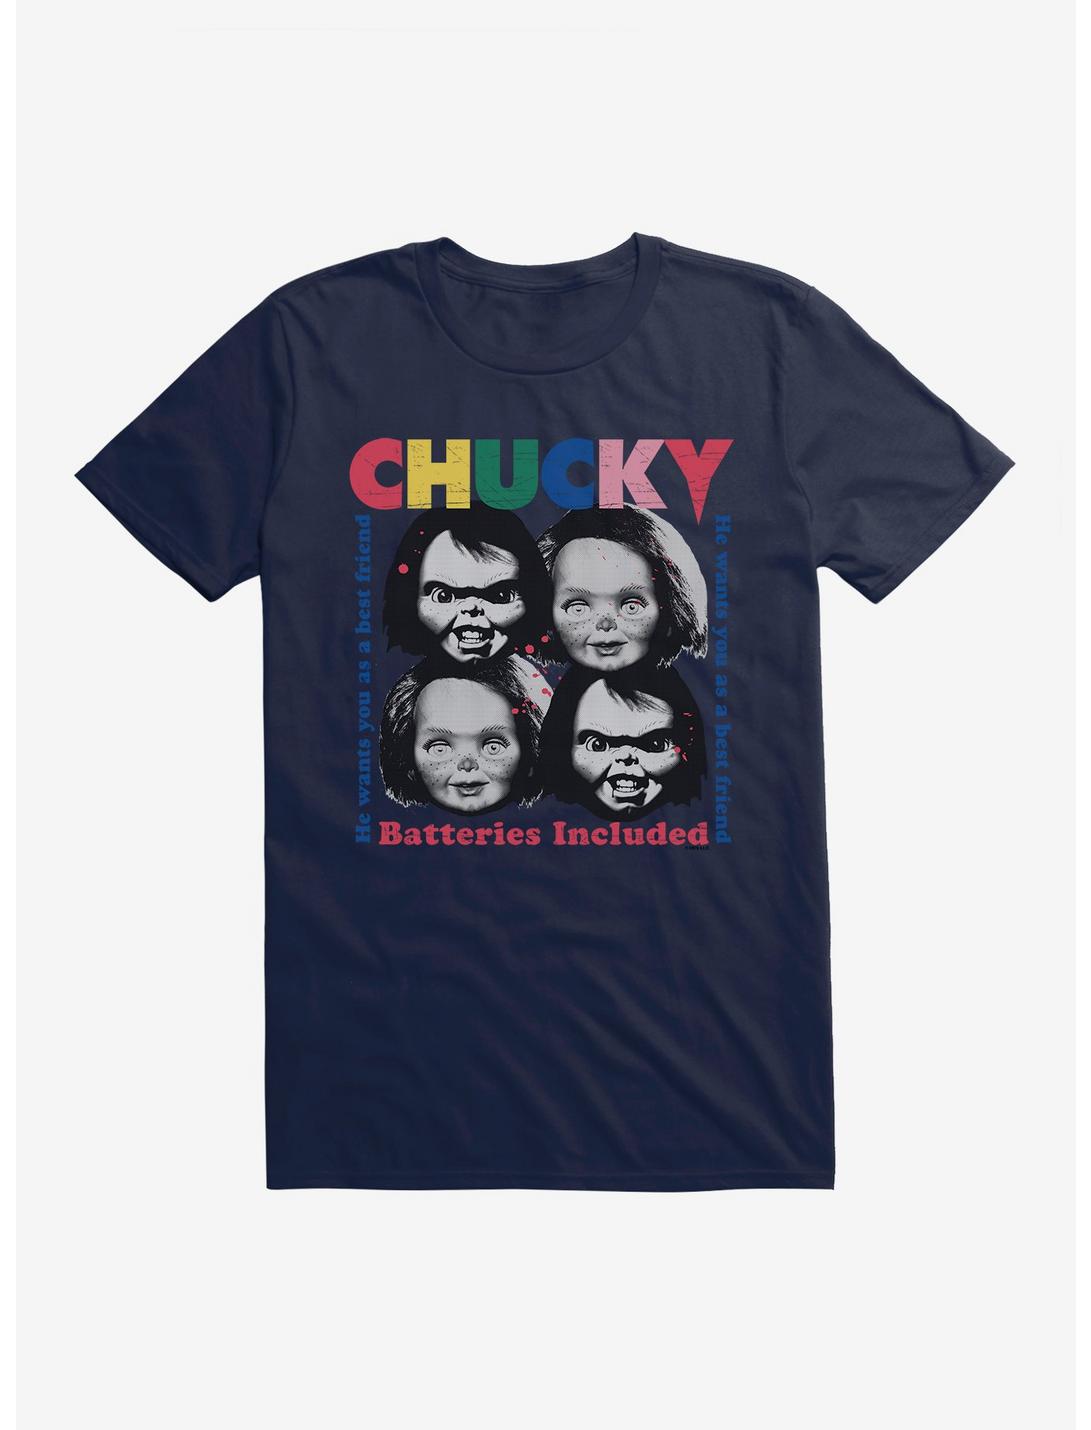 Chucky Batteries Included T-Shirt, MIDNIGHT NAVY, hi-res